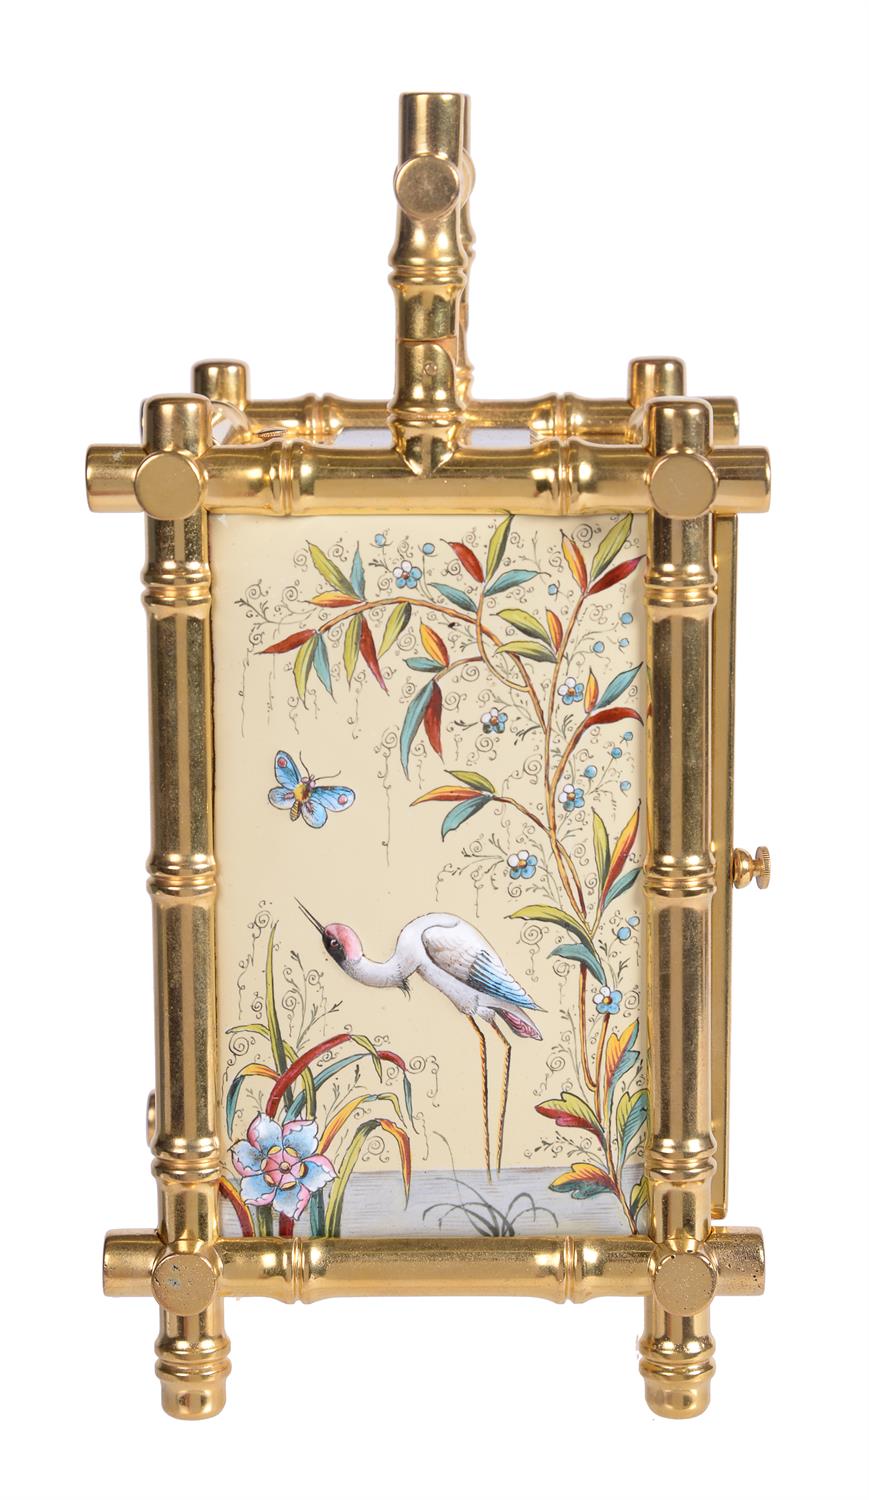 A gilt bamboo cased carriage clock with enamelled panels, probably by Brunelot, Paris, circa 1880 - Image 4 of 6